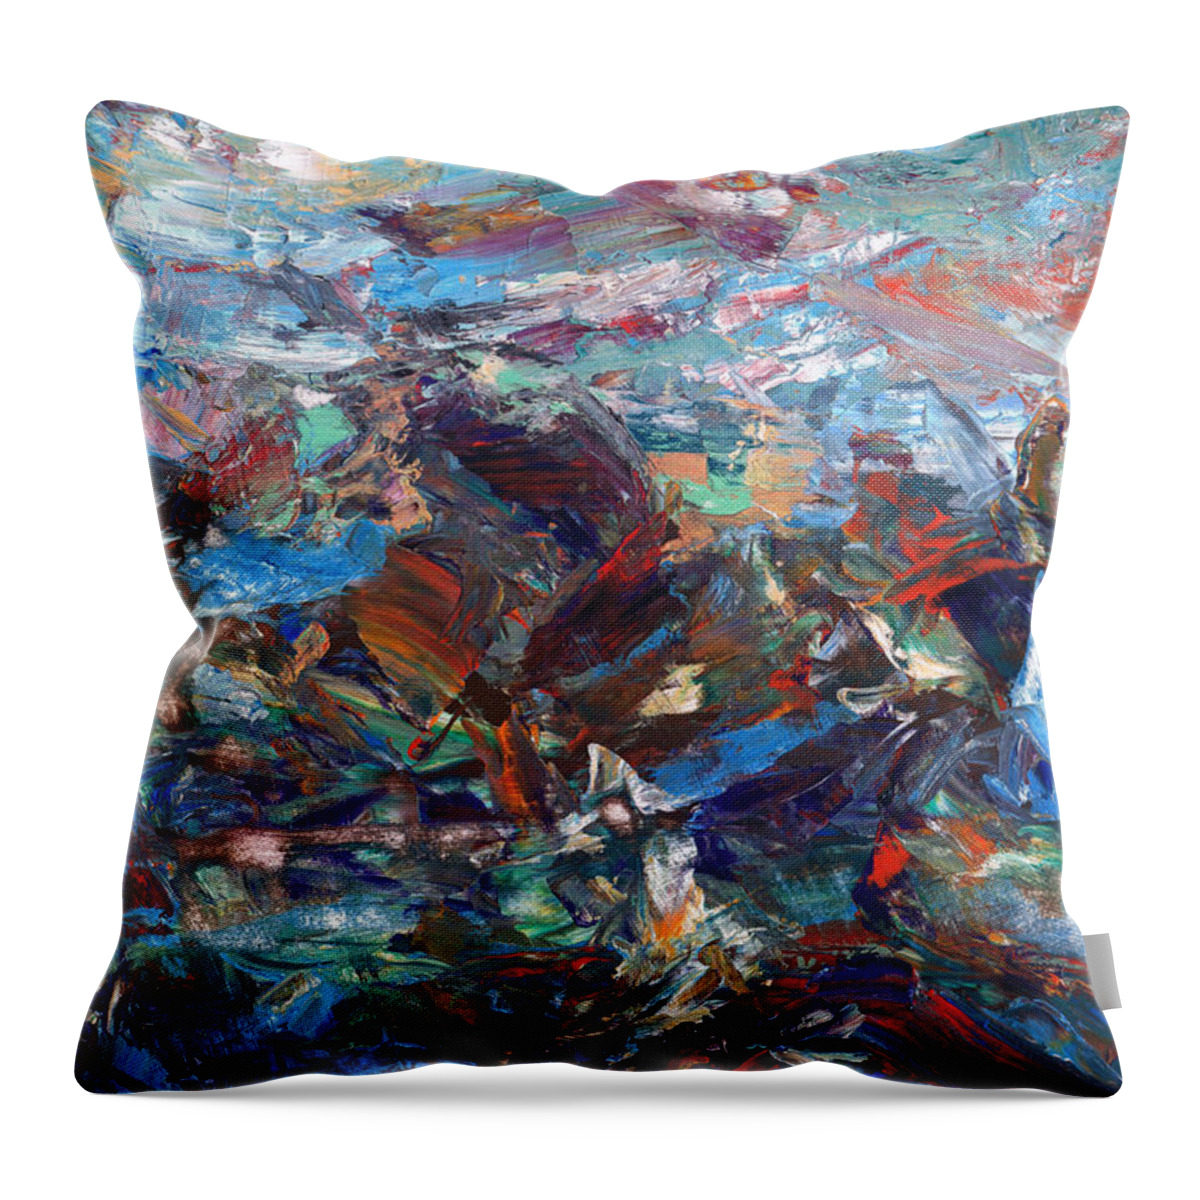 Hurricane Throw Pillow featuring the painting Hurricane by James W Johnson